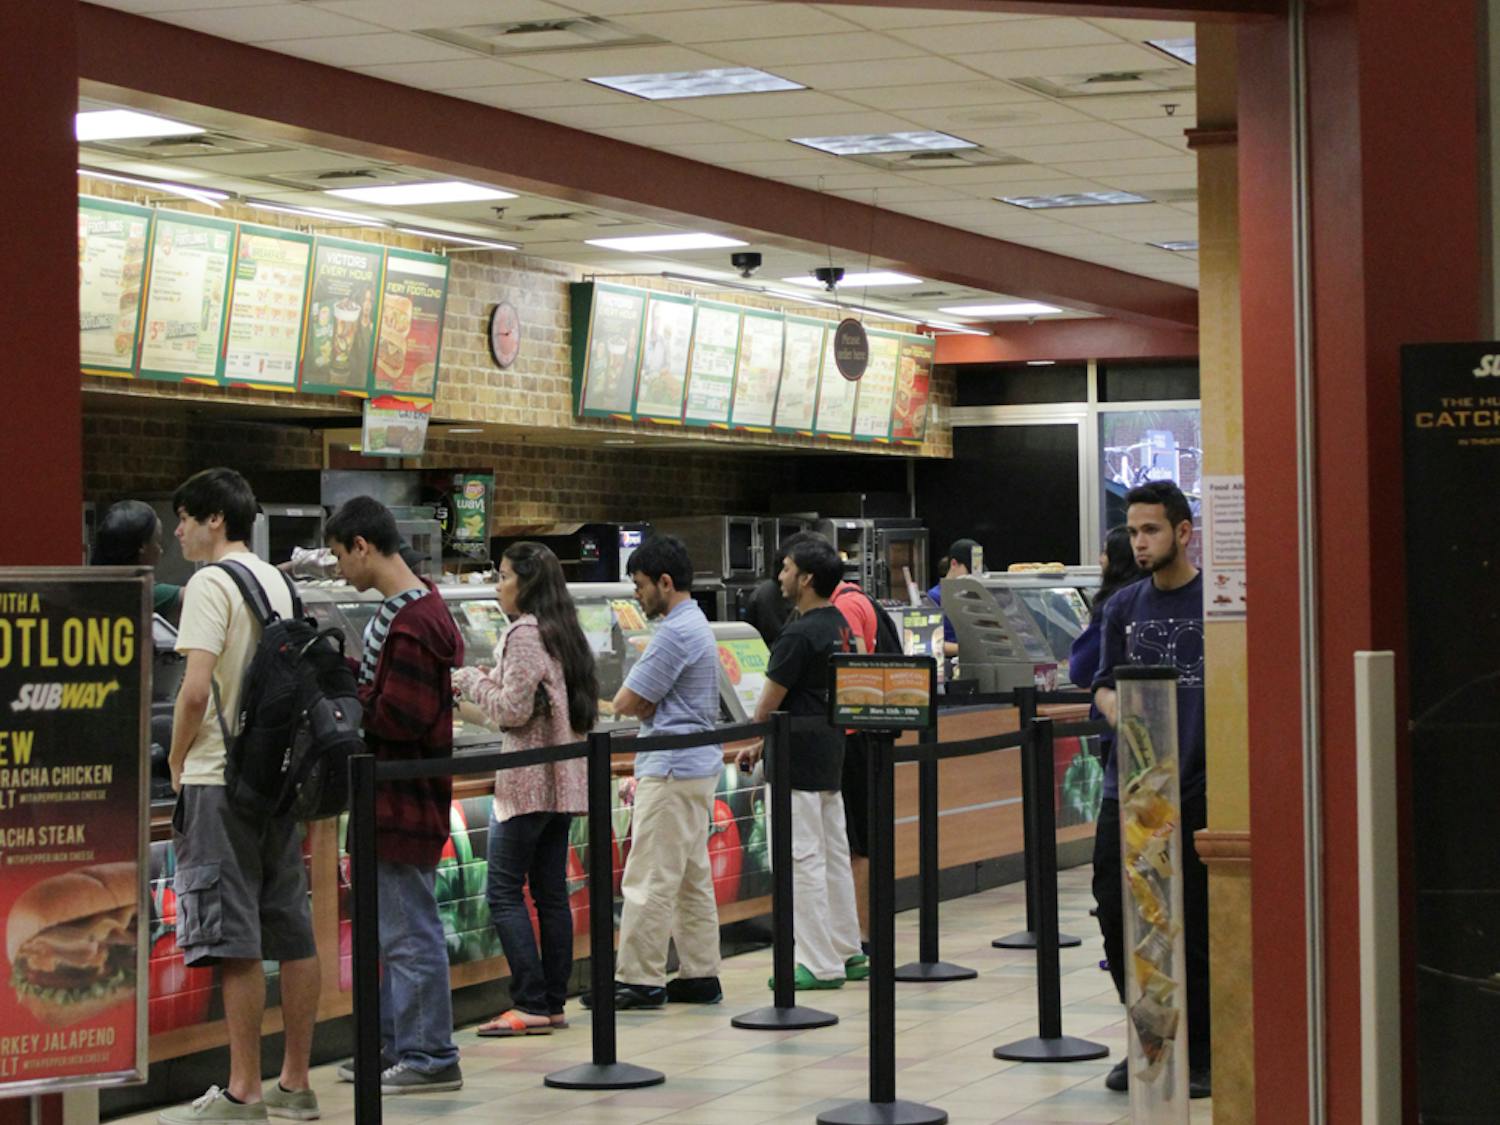 Subway is being added to meal plans in Spring 2014.